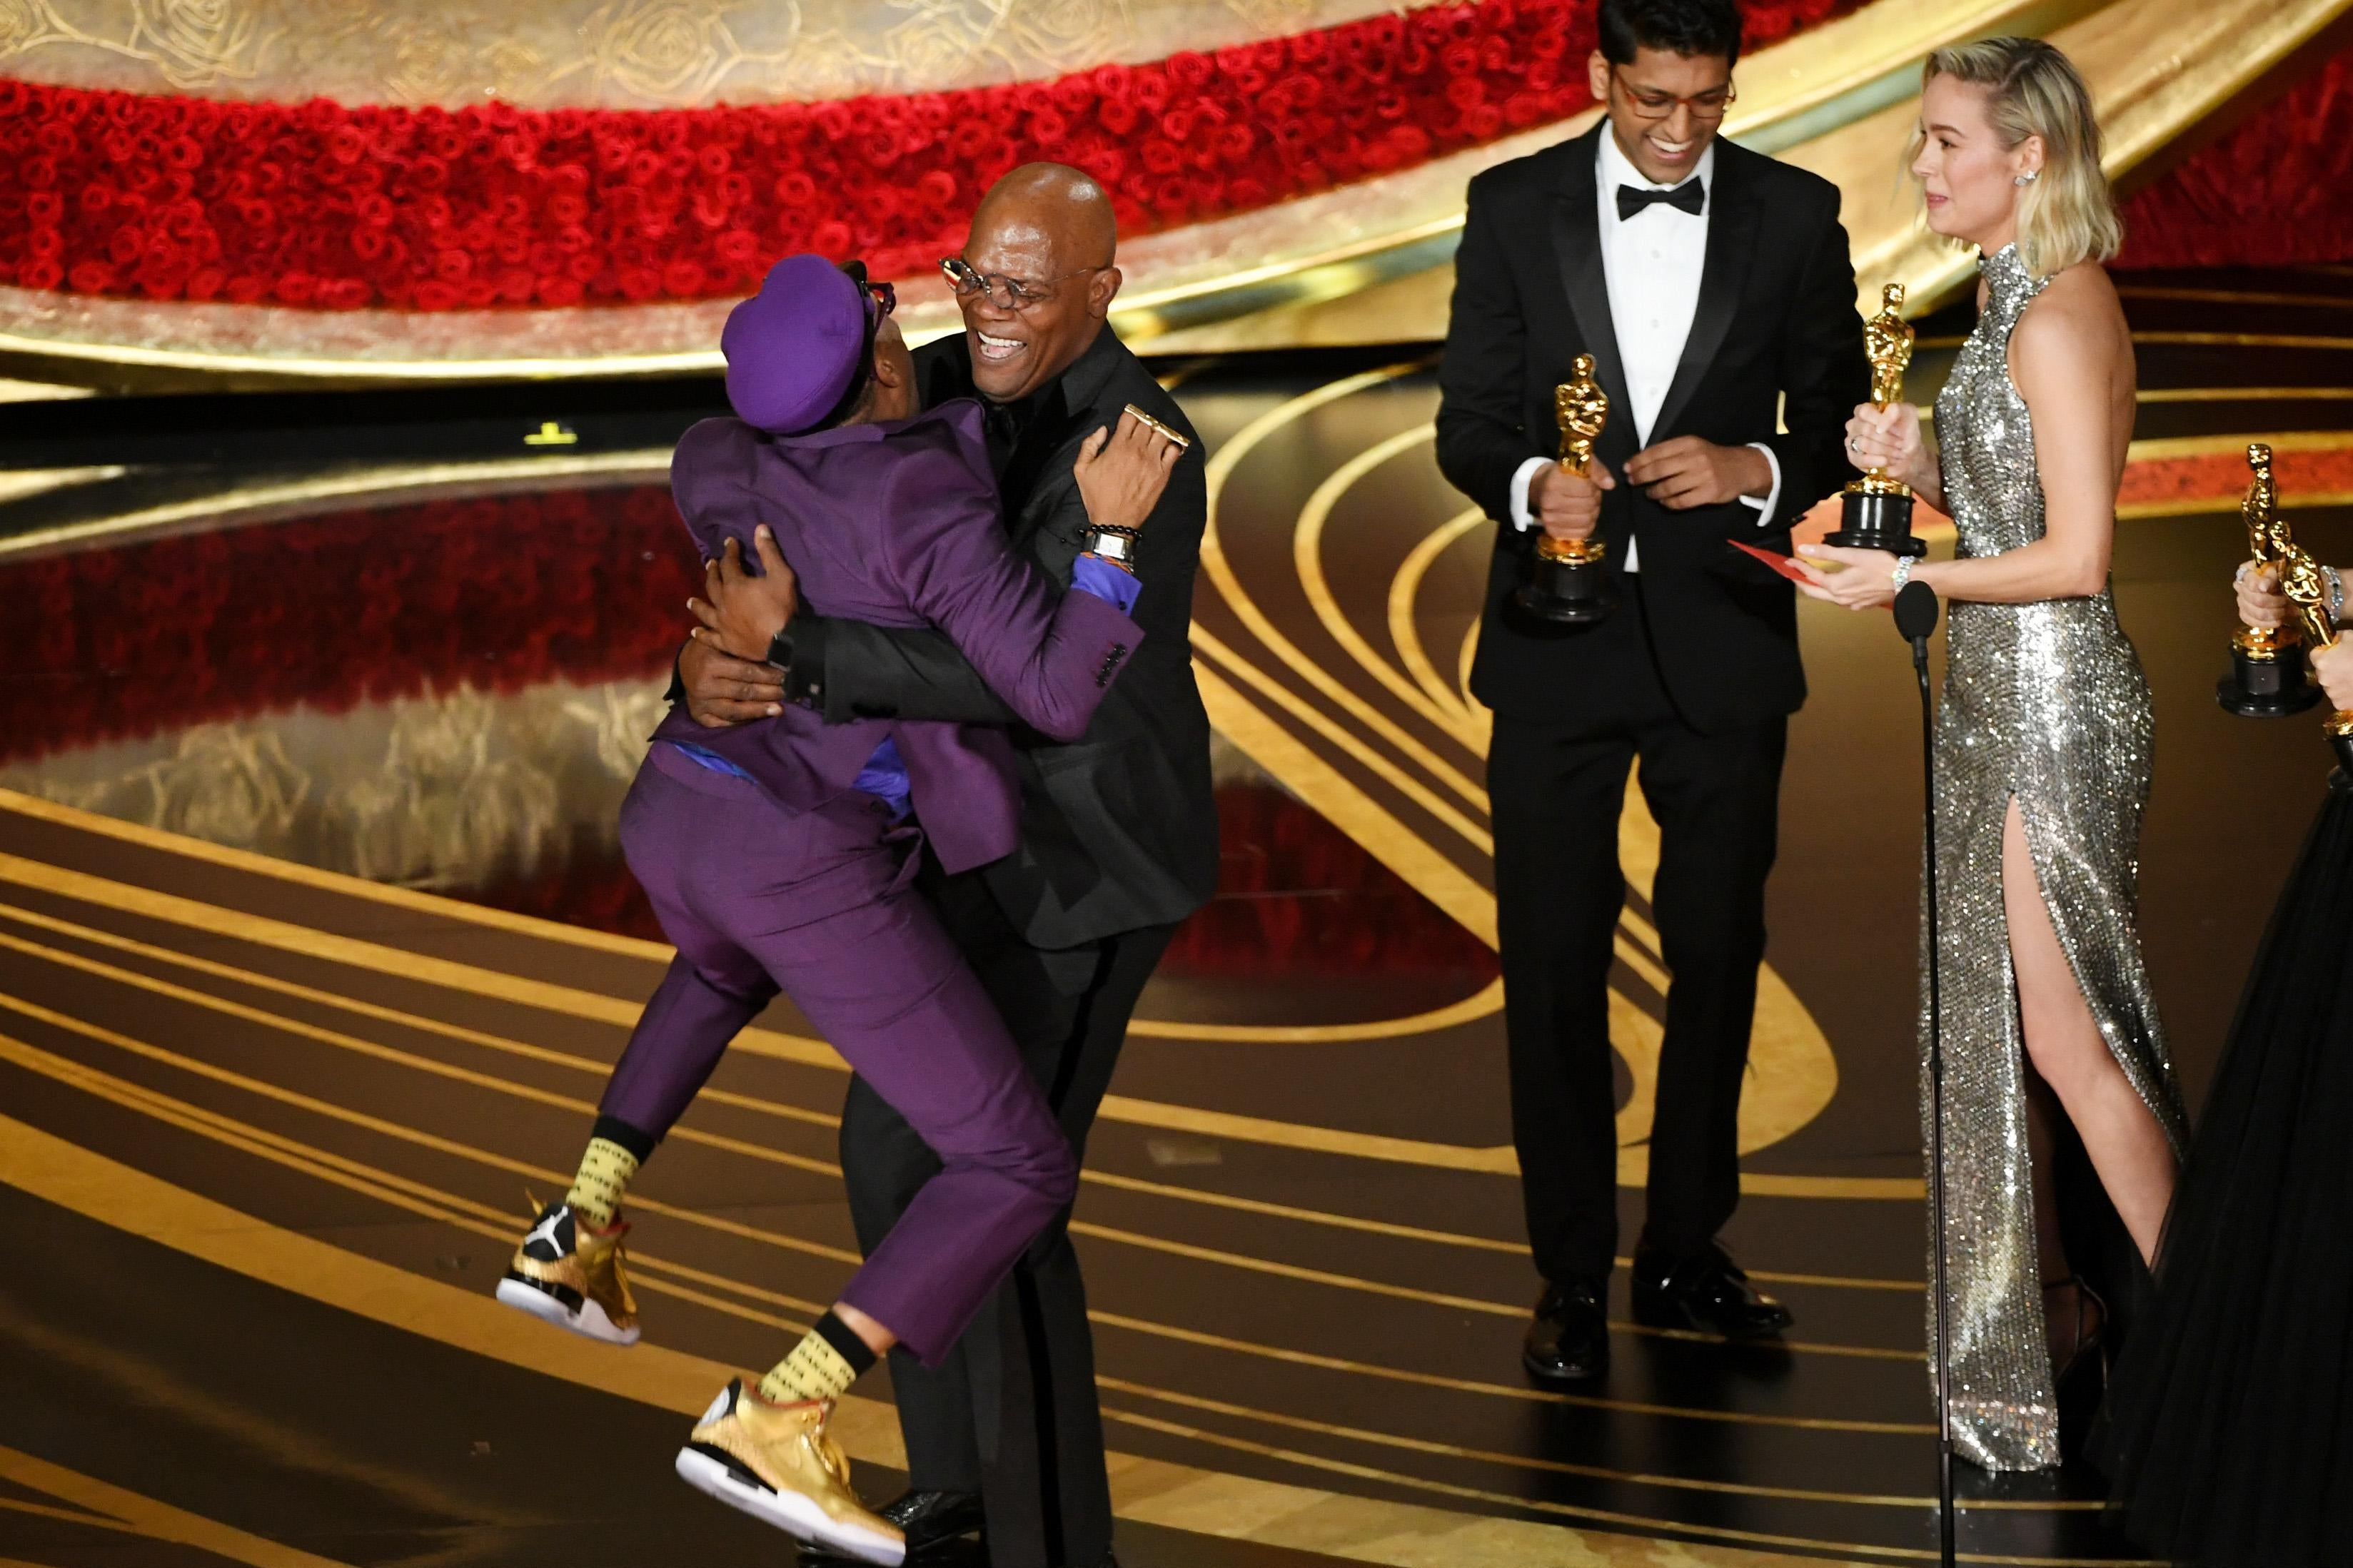 HOLLYWOOD, CALIFORNIA - FEBRUARY 24: Spike Lee accepts the Best Adapted Screenplay award for 'BlacKkKlansman' from Samuel L. Jackson onstage during the 91st Annual Academy Awards at Dolby Theatre on February 24, 2019 in Hollywood, California. (Photo by Kevin Winter/Getty Images)